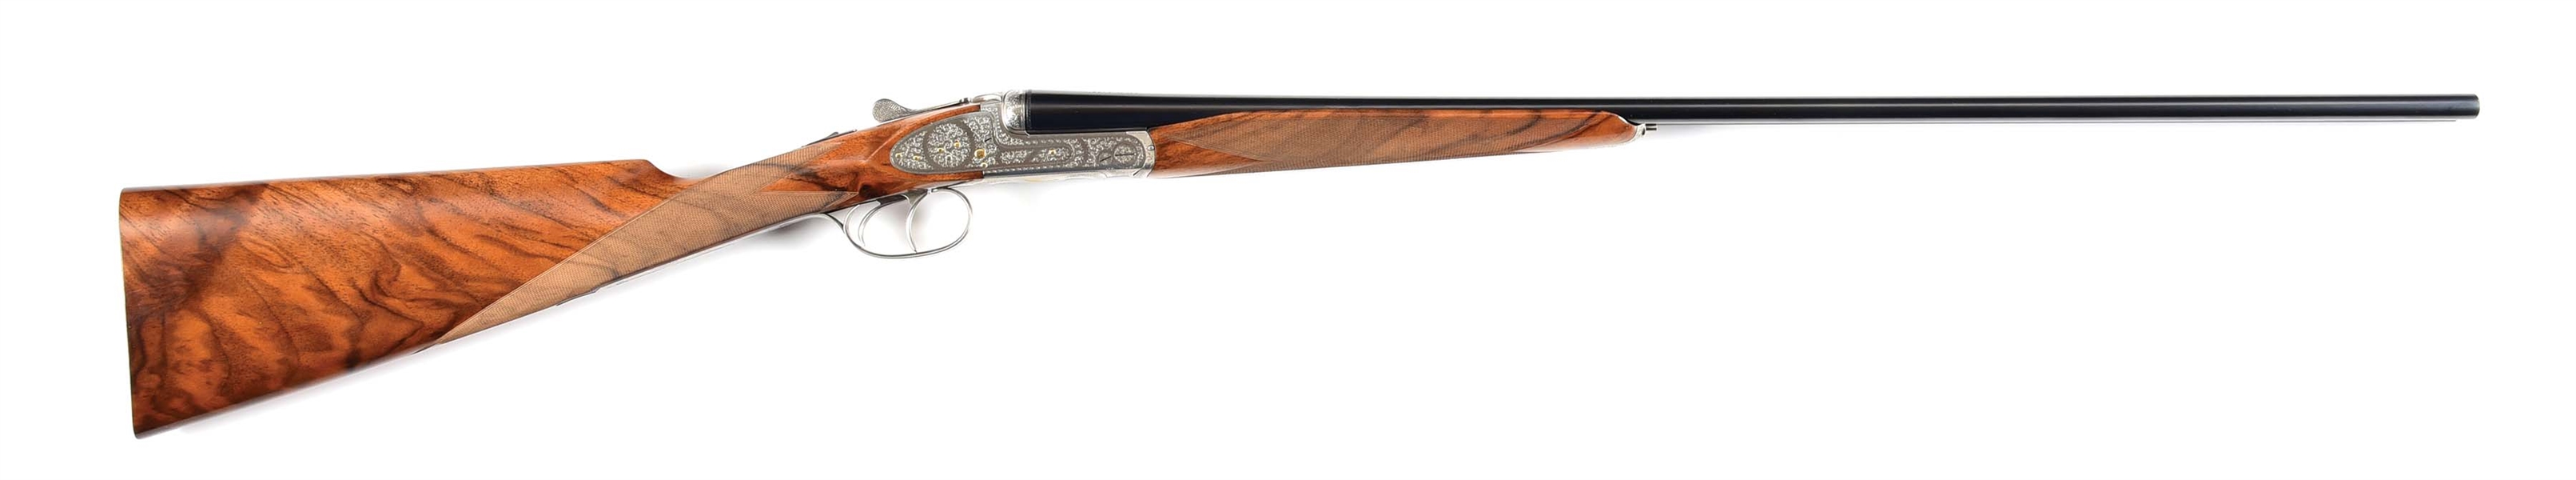 (M) LUCCHINI .410 SIDE BY SIDE SHOTGUN WITH GAMBA SIGNED ENGRAVING.